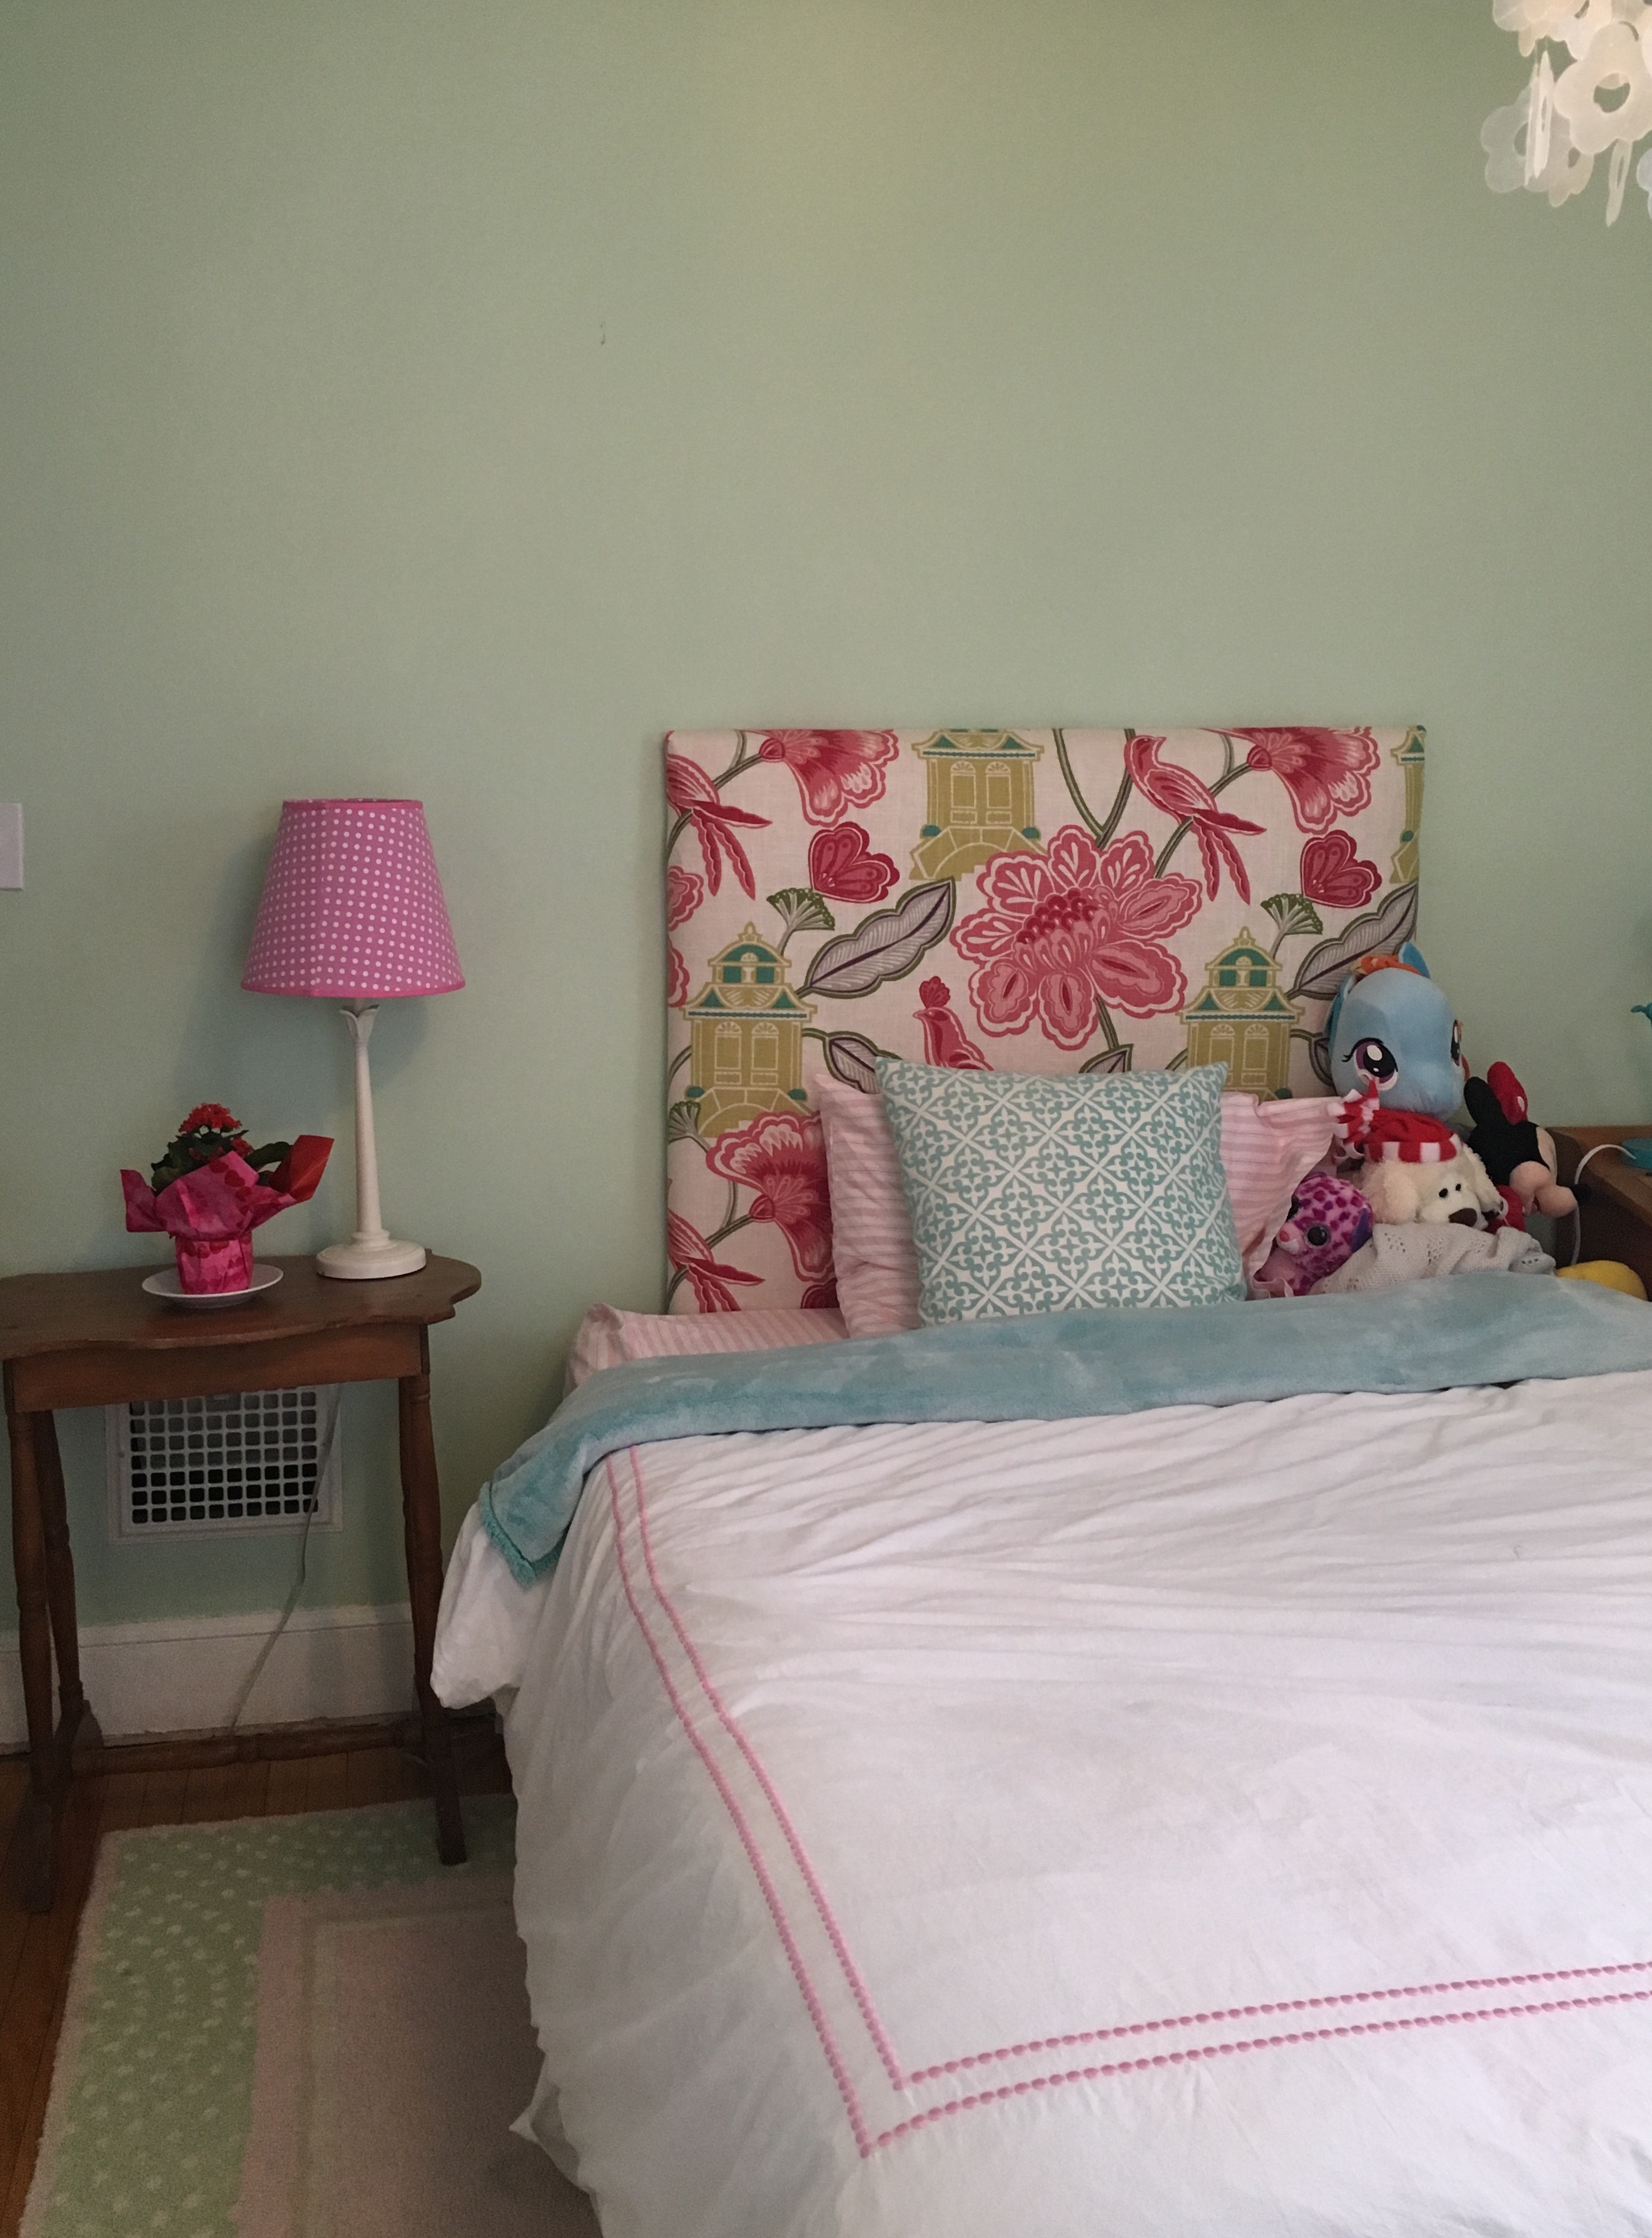 BEFORE- I still love the headboard I made, but with the refresh we can bring in art and more personality